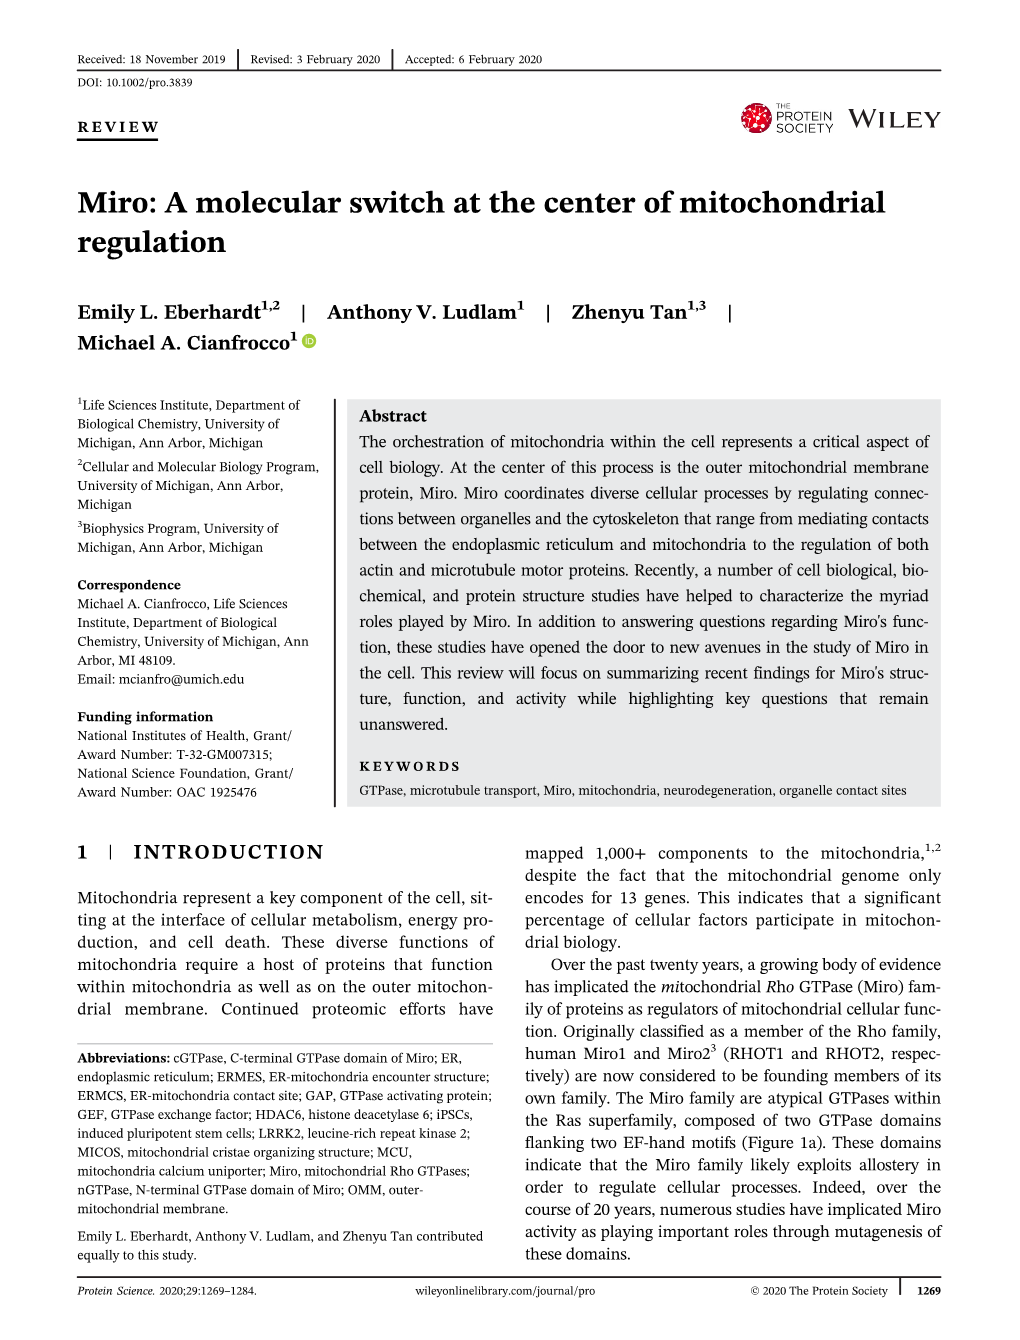 Miro: a Molecular Switch at the Center of Mitochondrial Regulation